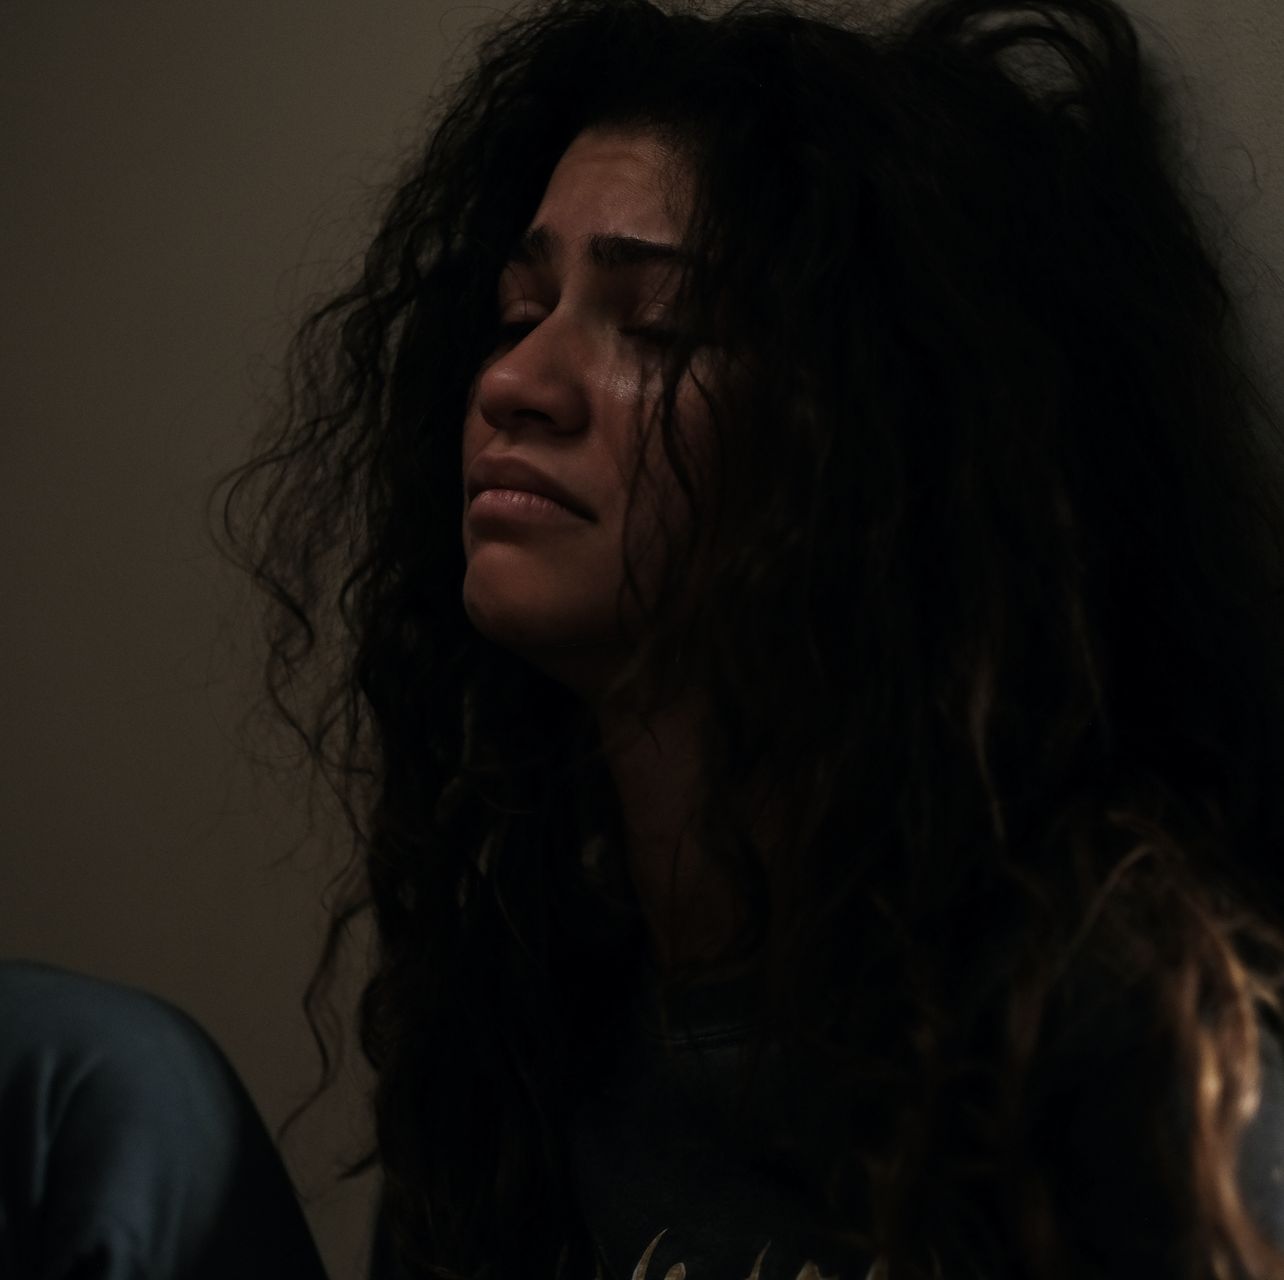 Zendaya shows off her acting chops, Cassie is in big trouble, and Laurie and her birds are still terrifying. A recap of Euphoria season 2, episode 5.